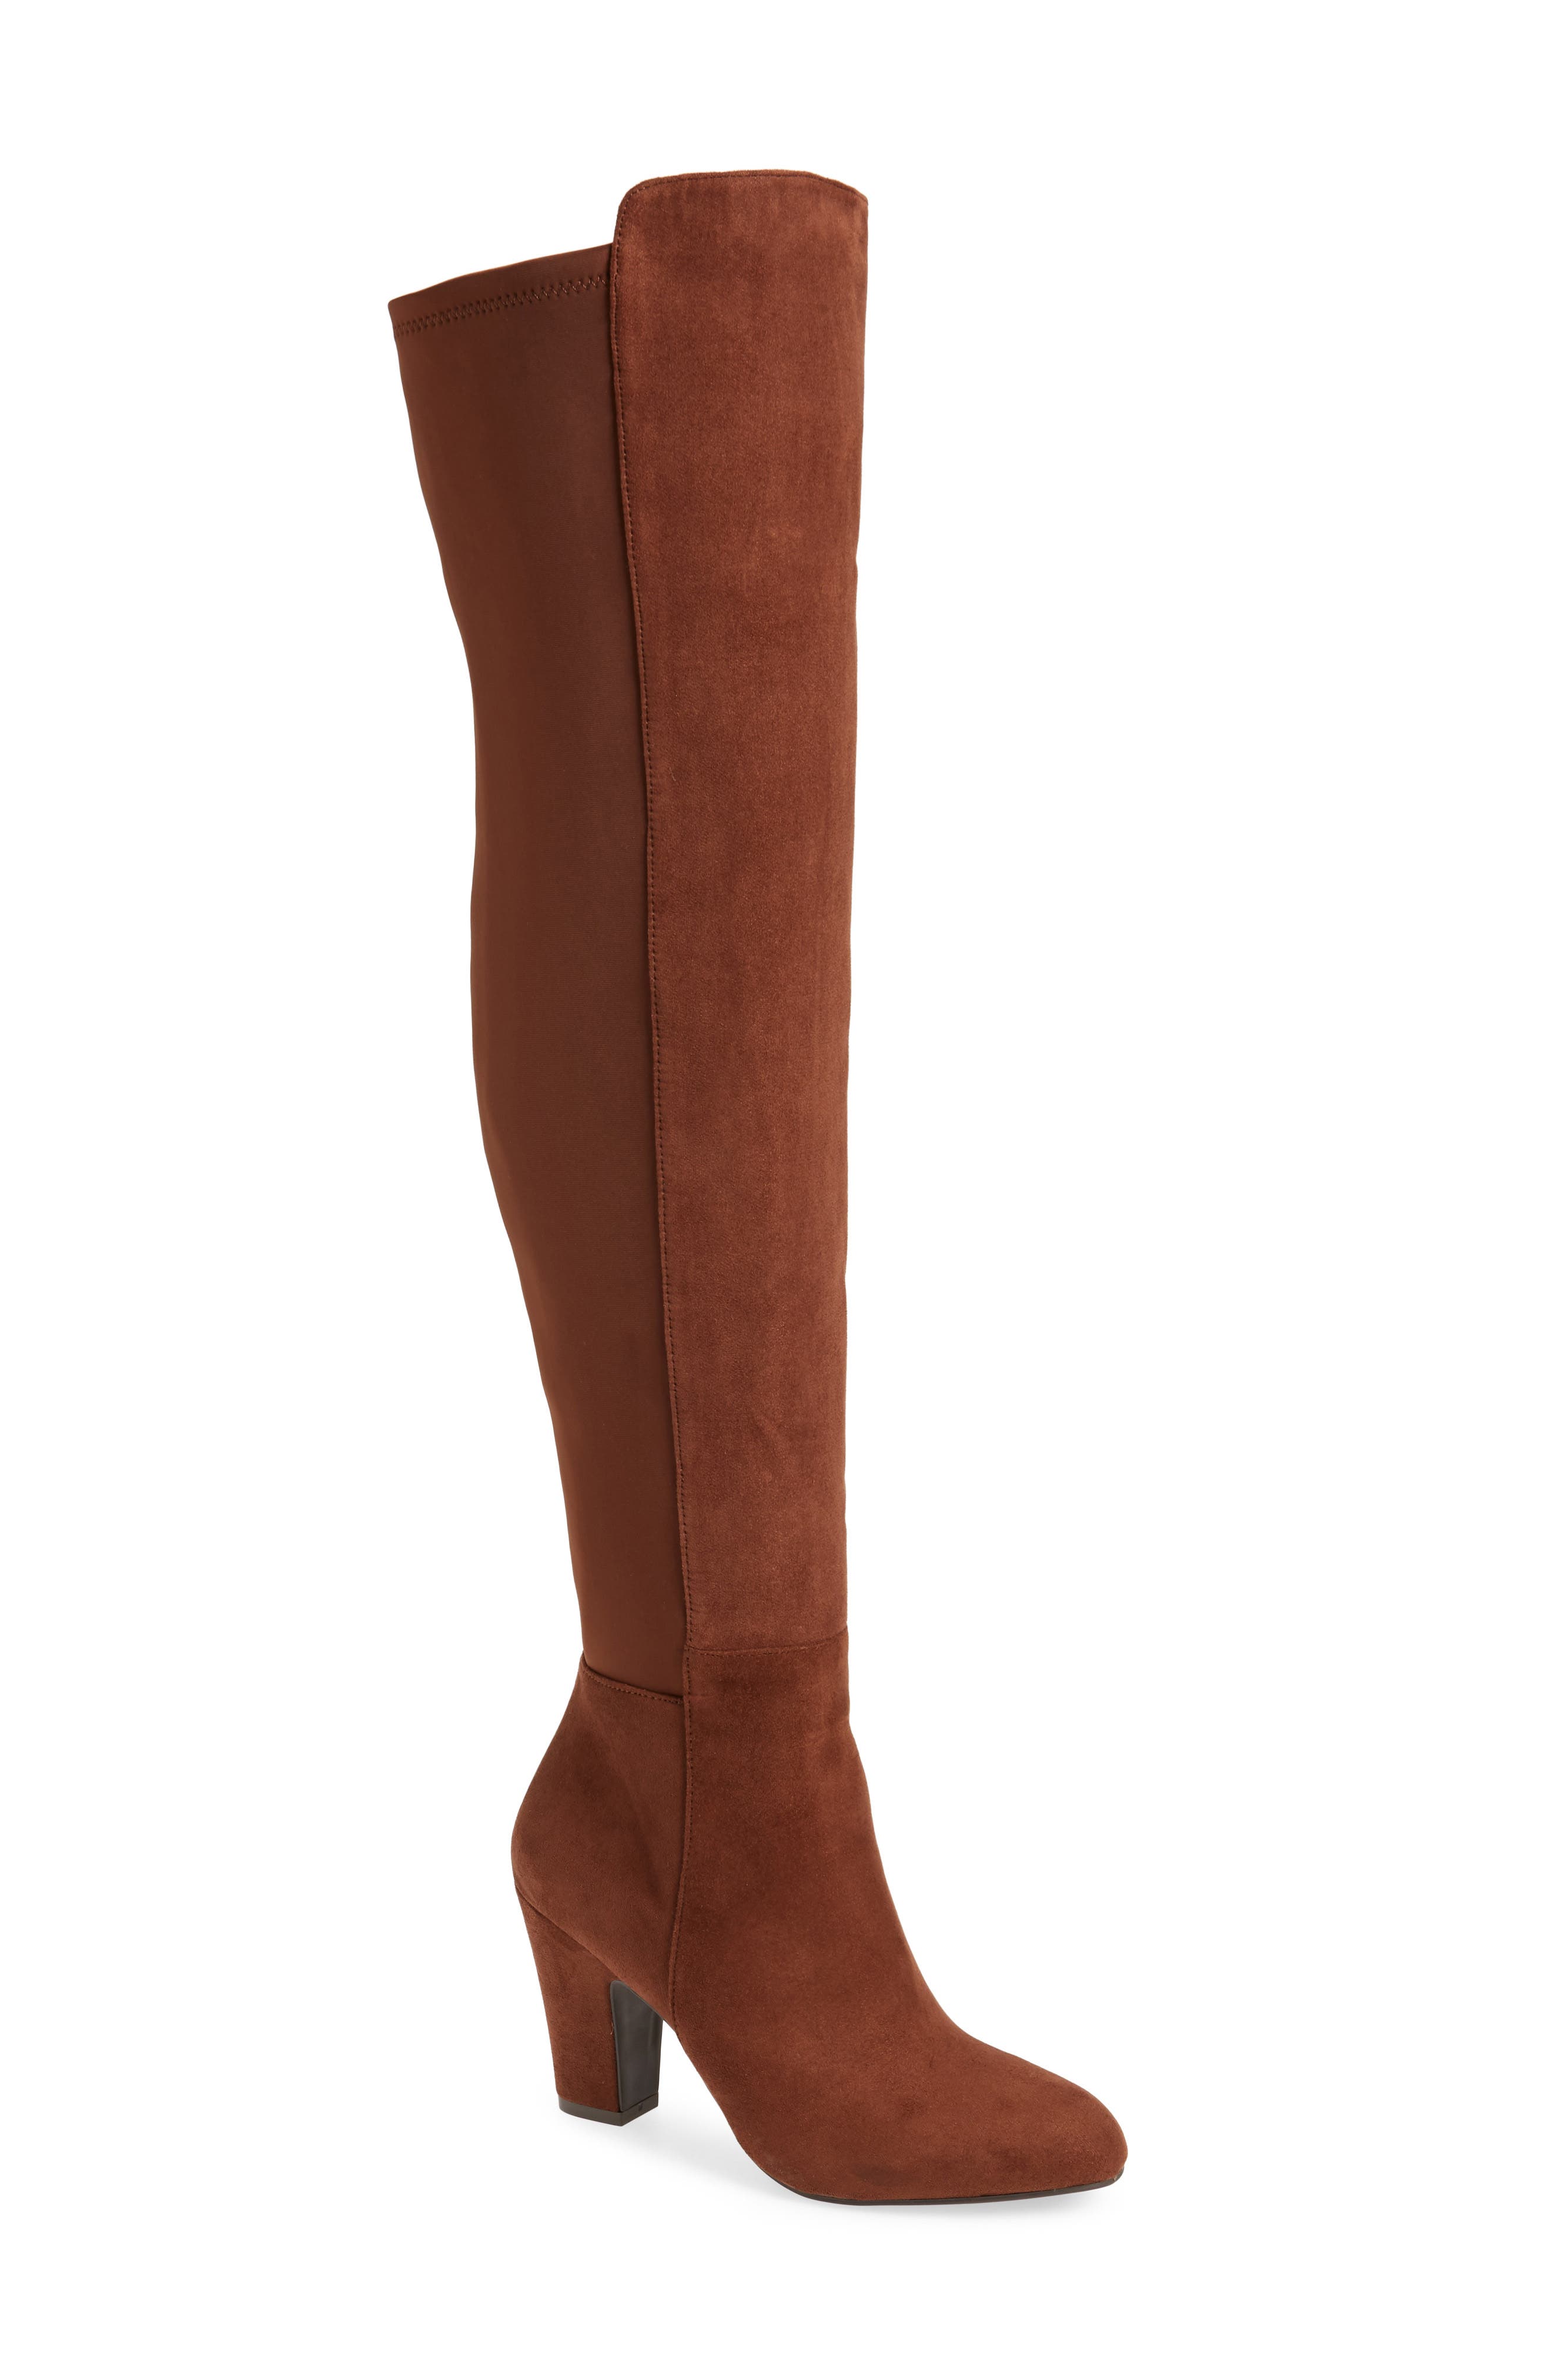 light tan over the knee boots